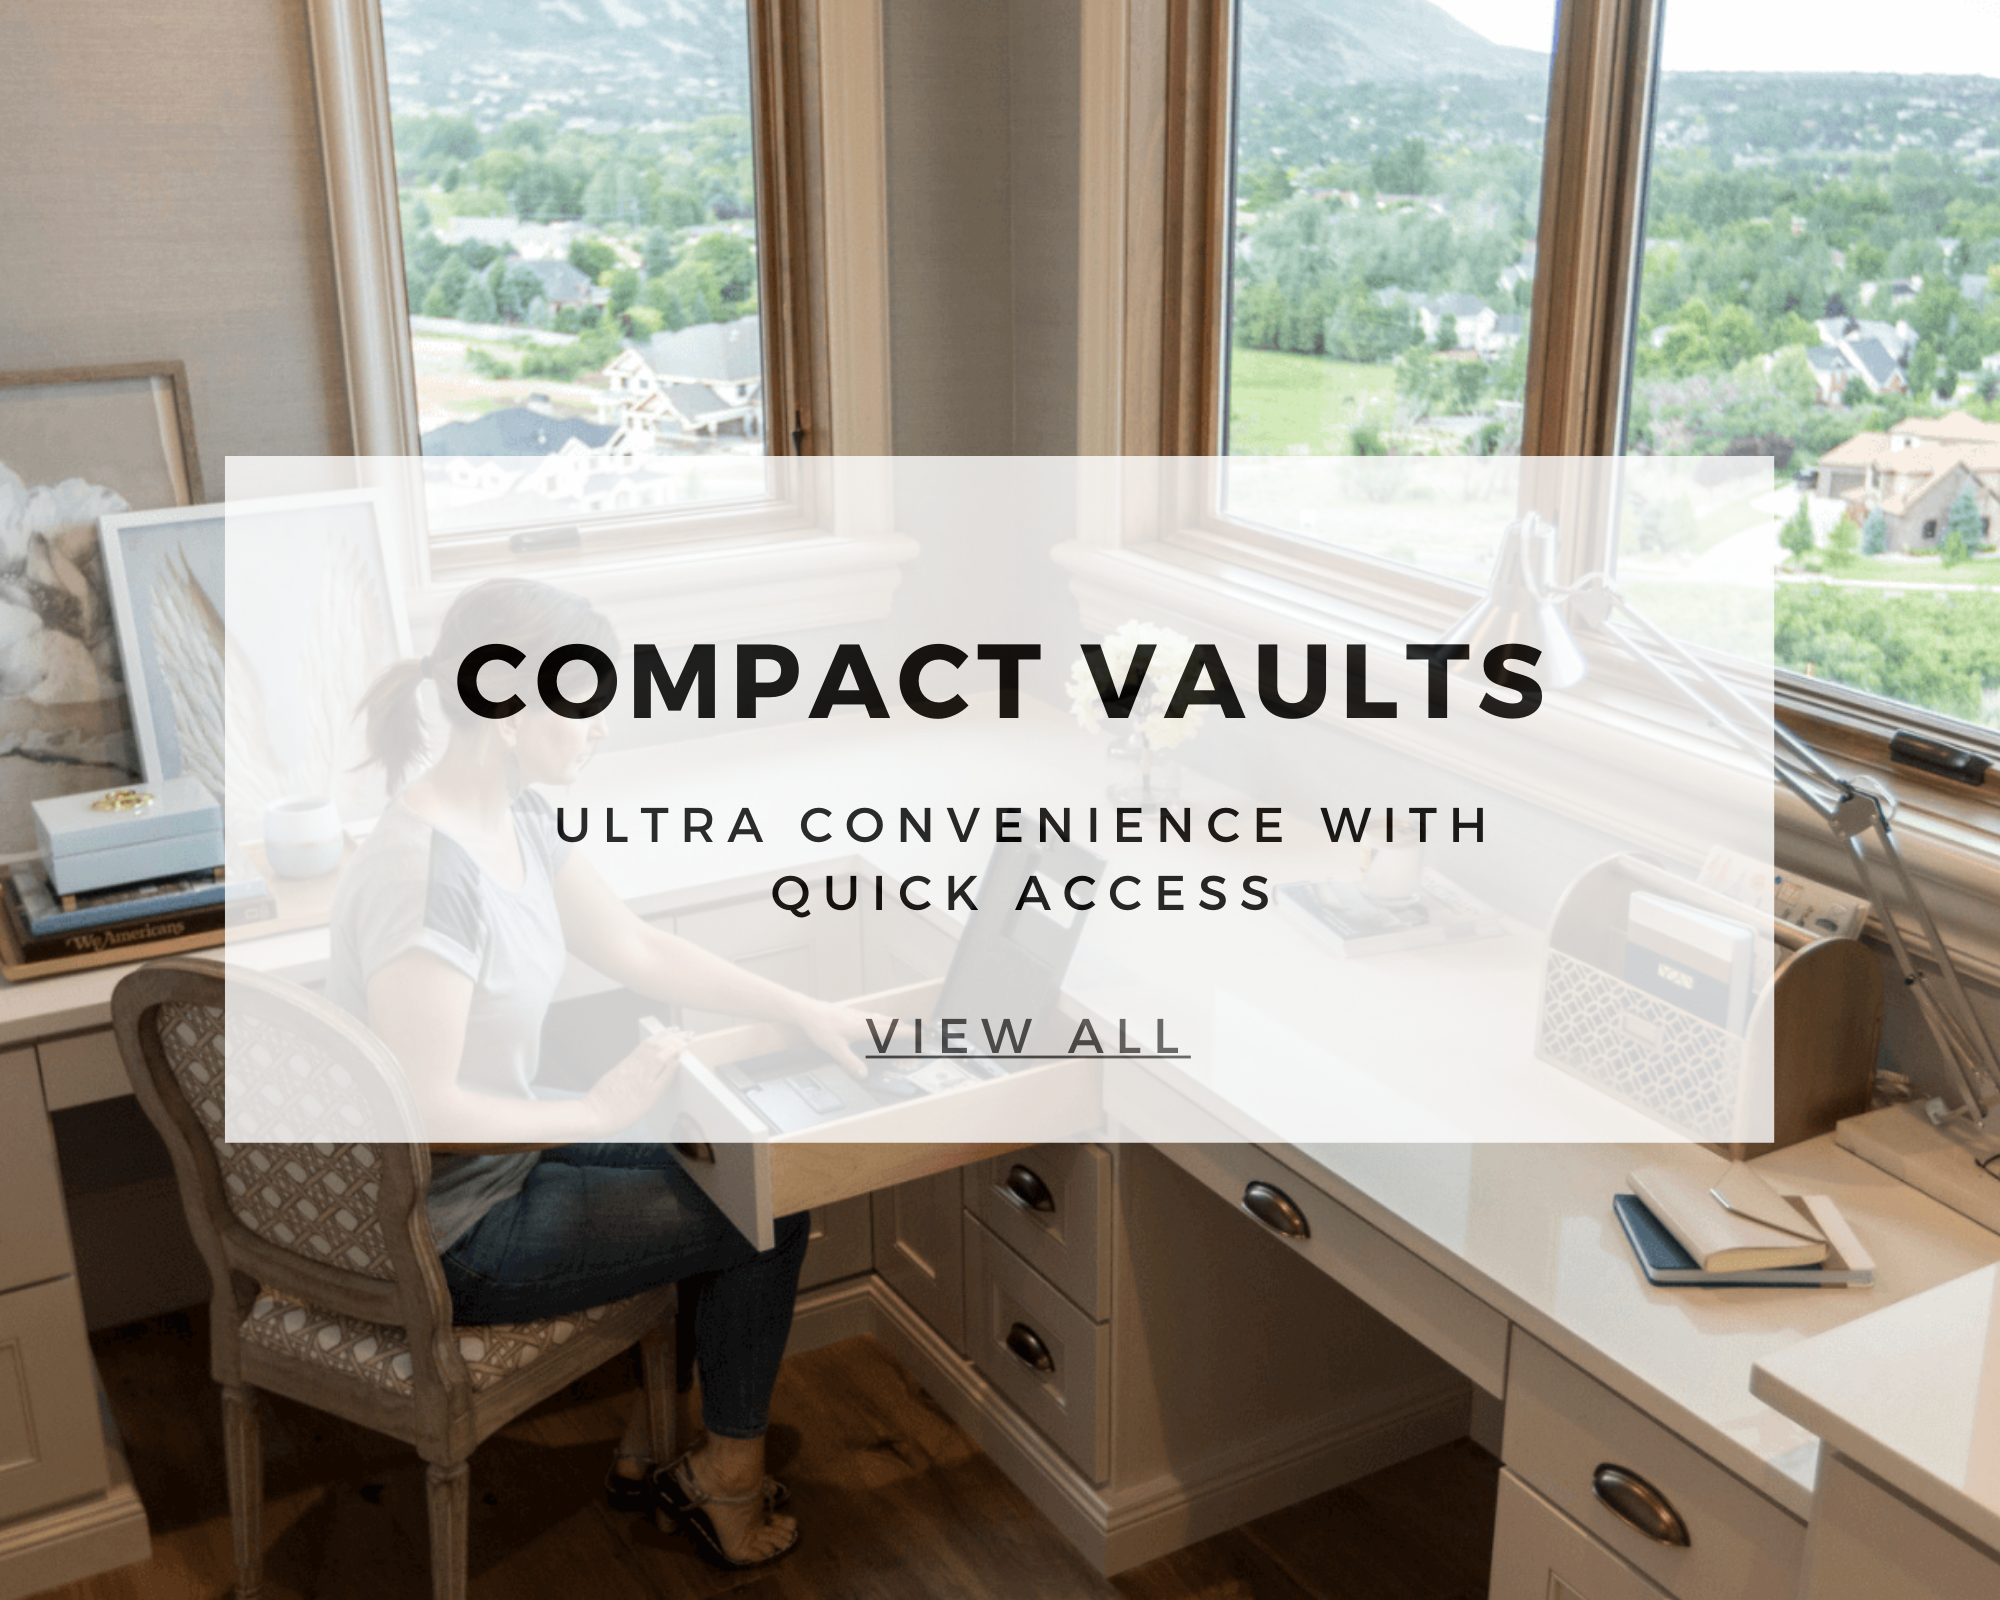 Compact Vaults Ultra convenience with quick access